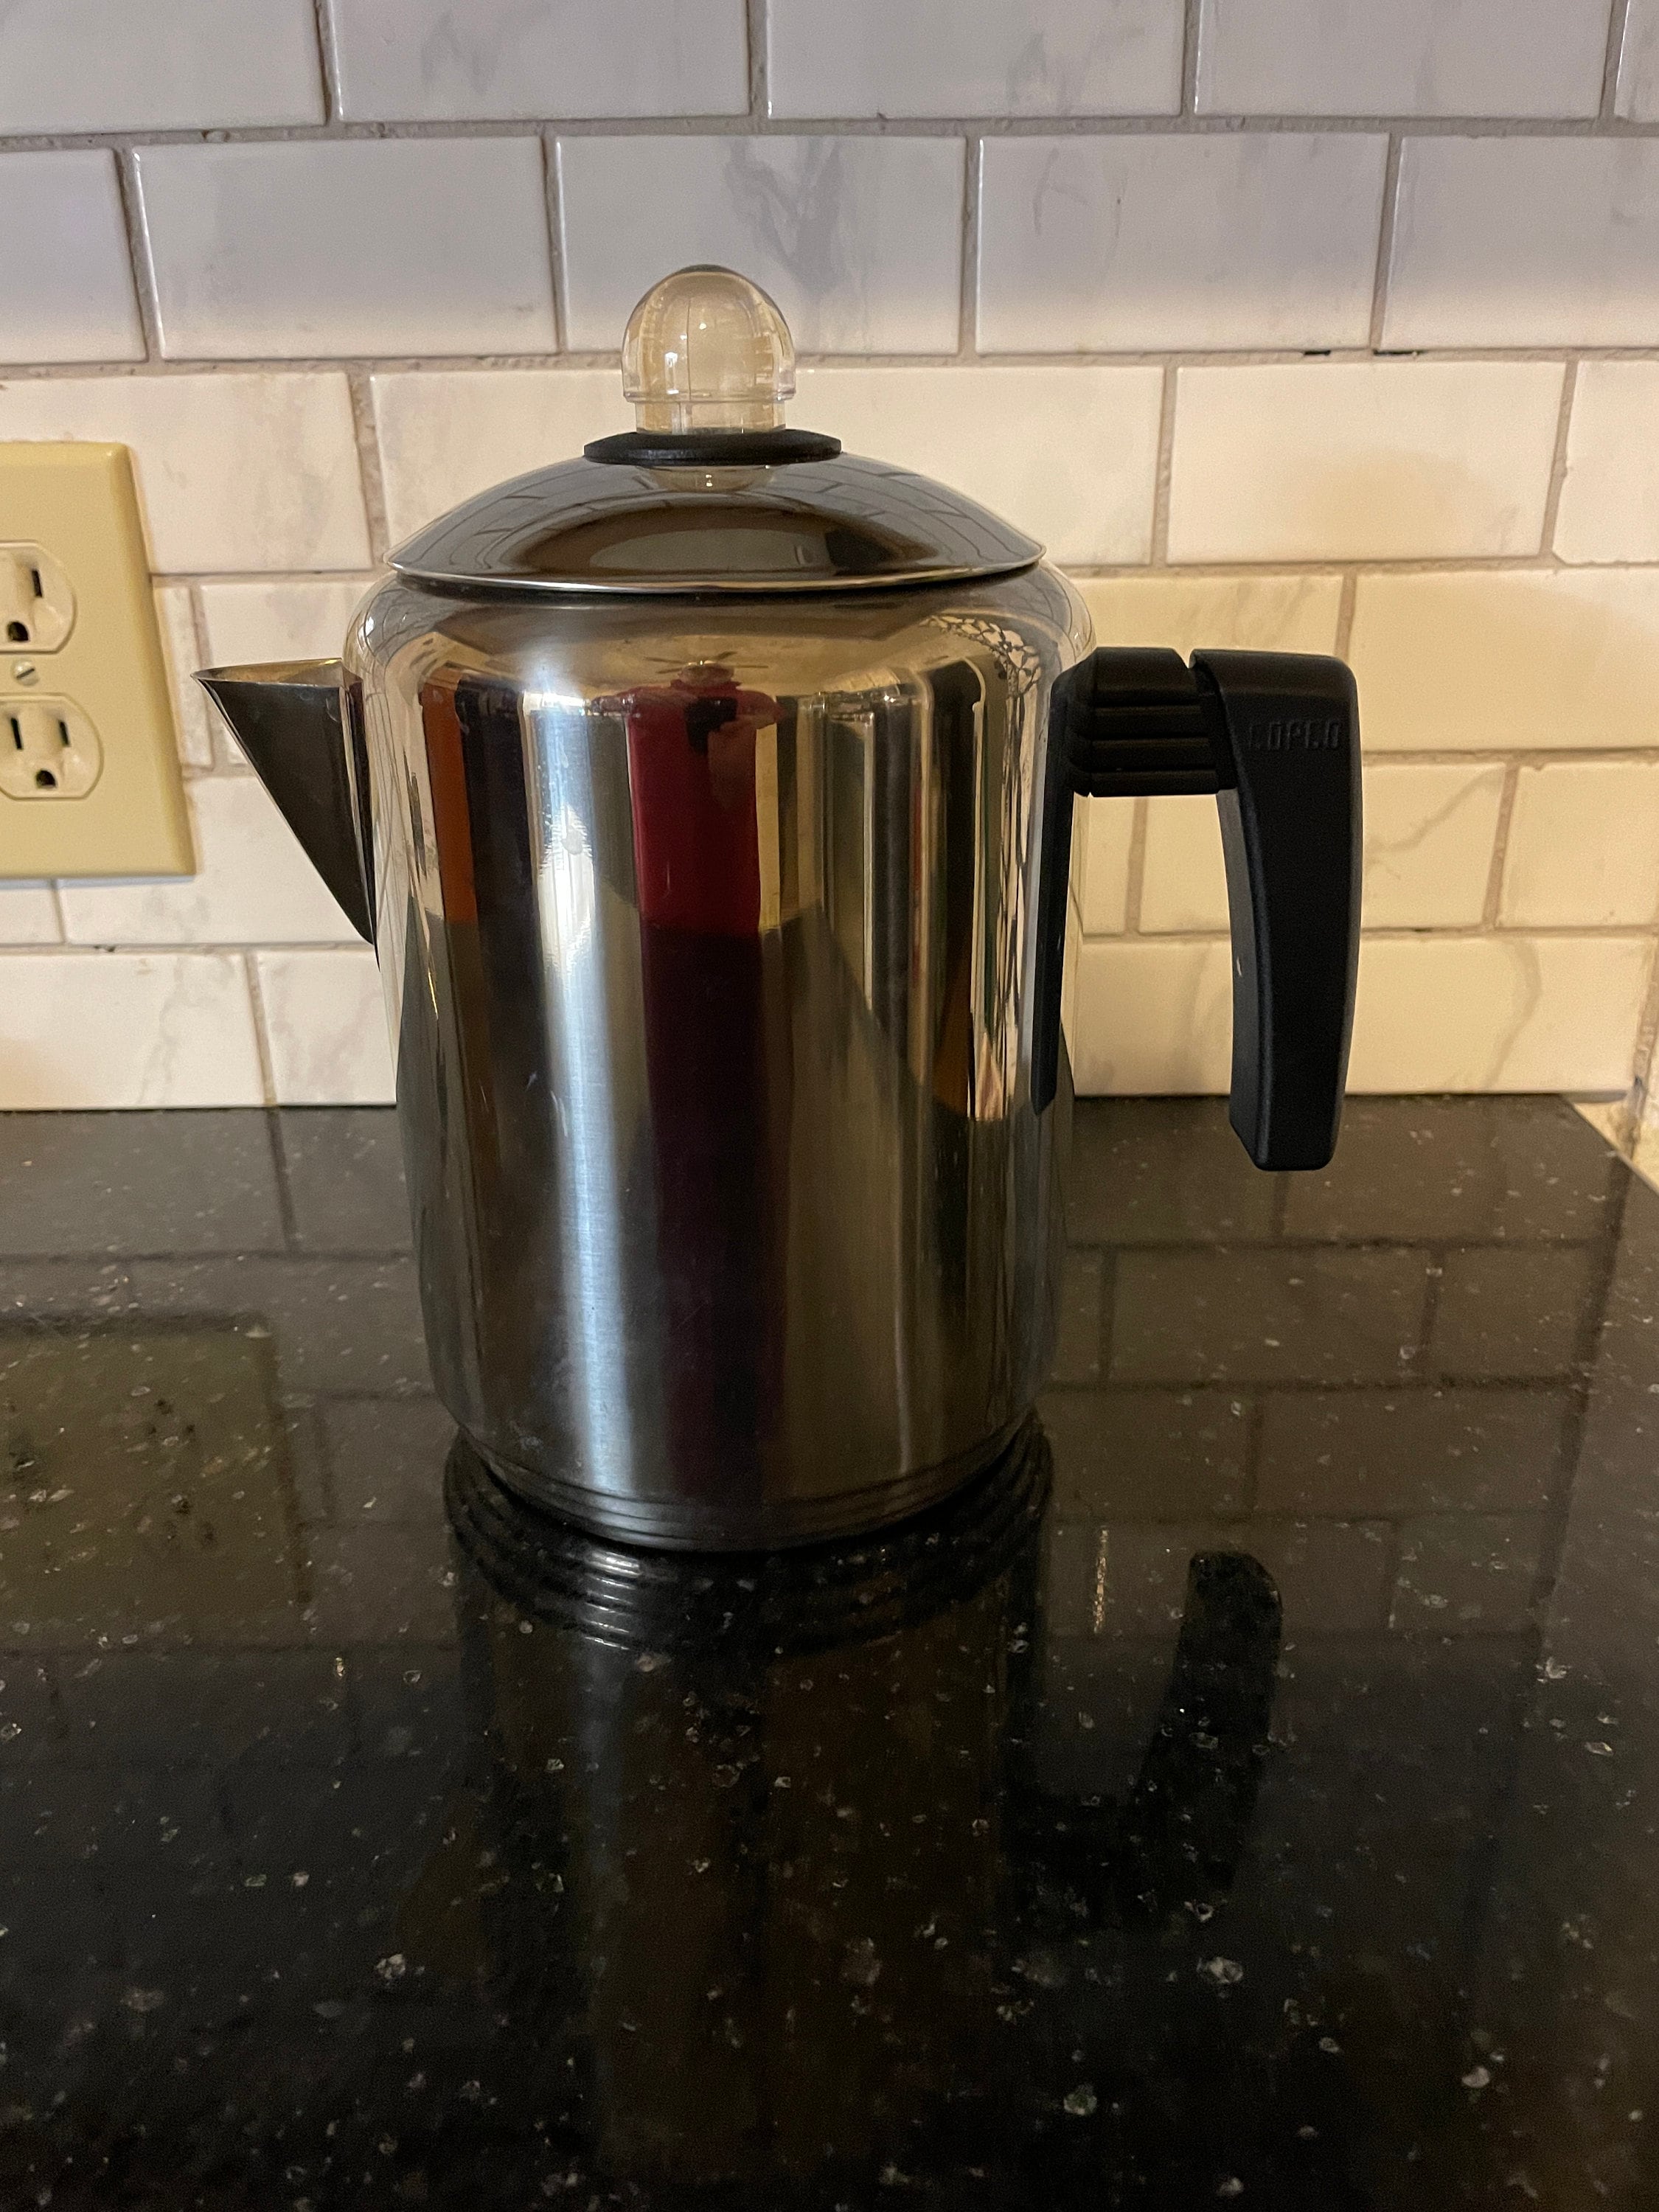 Cook N Home 8 Cup Stainless Steel Stovetop Coffee Percolator Pot Kettle Tea